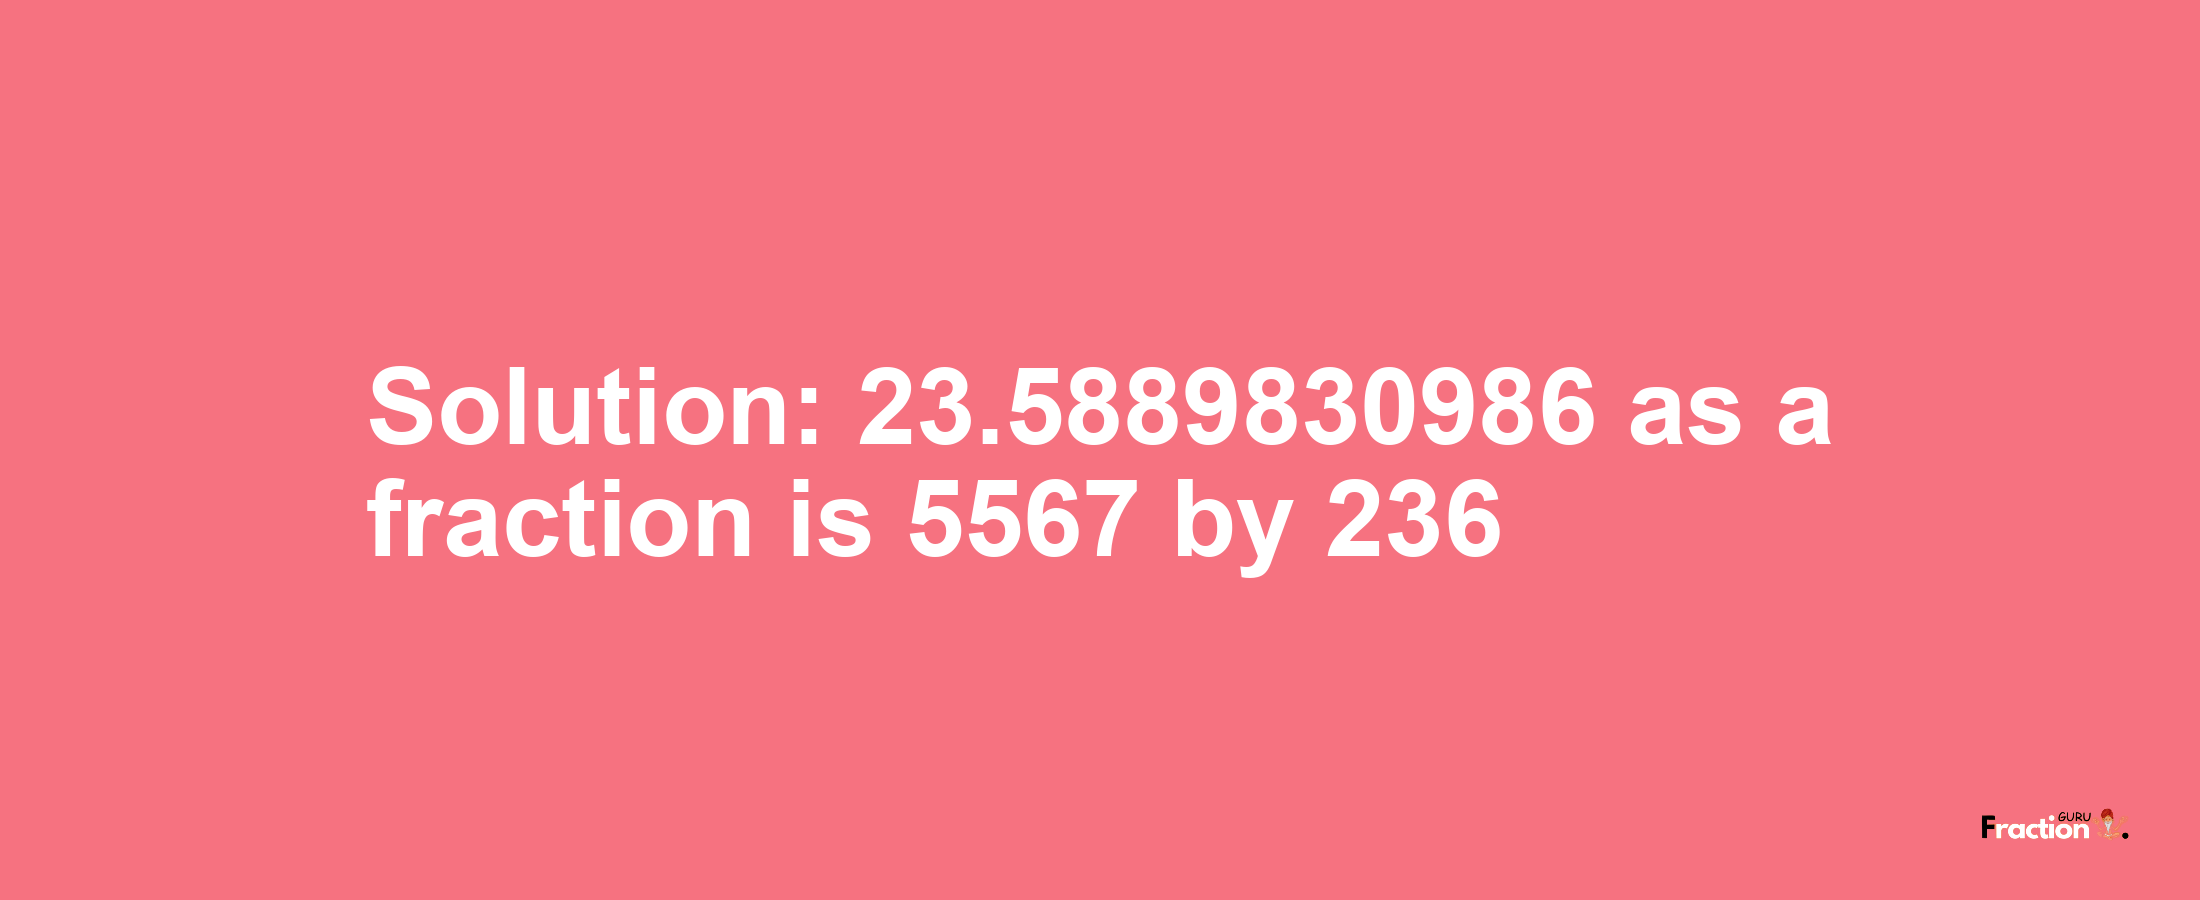 Solution:23.5889830986 as a fraction is 5567/236